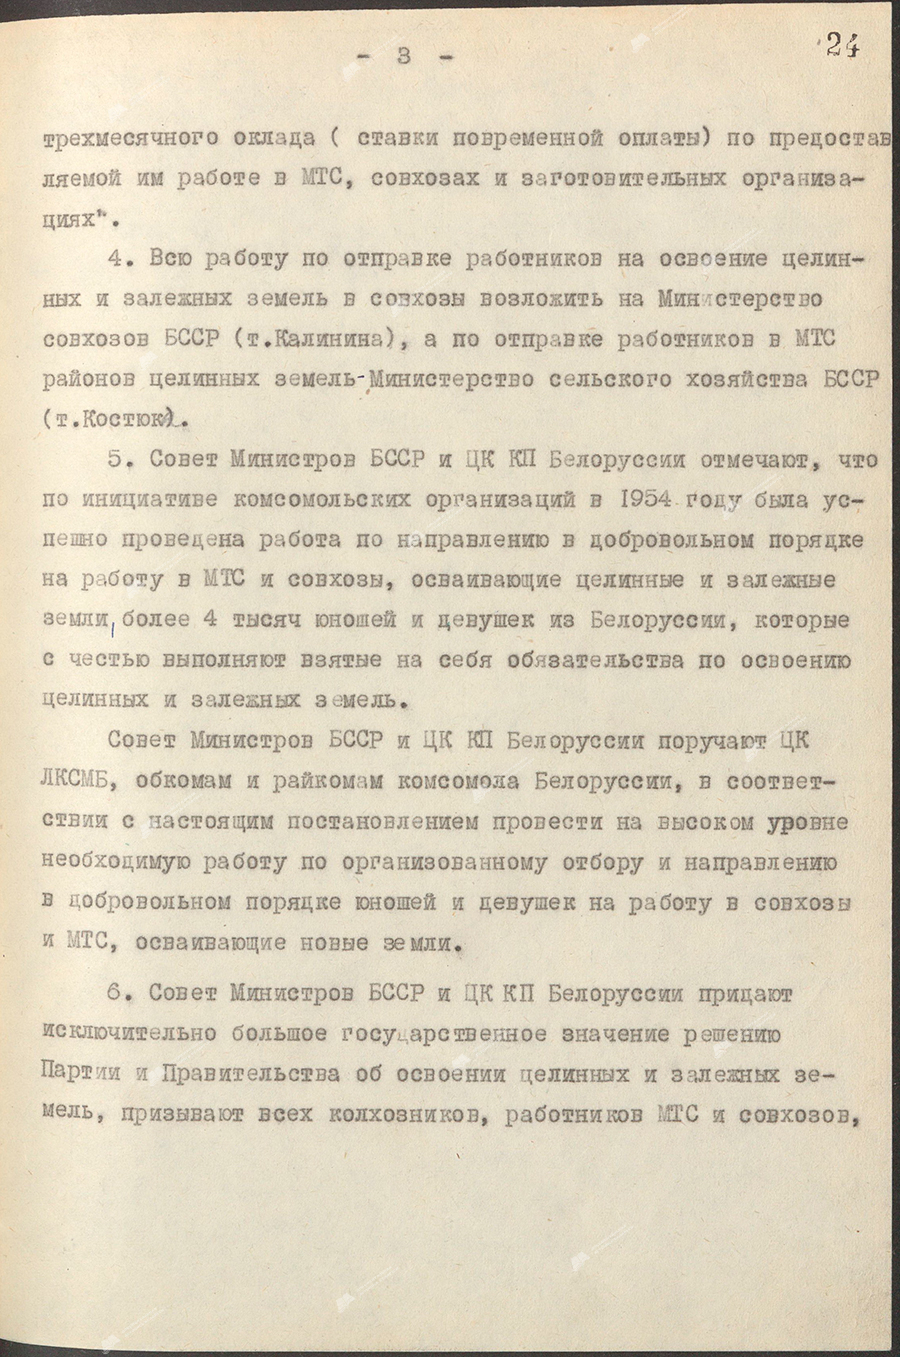 Resolution No. 5 of the Council of Ministers of the BSSR and the Central Committee of the Communist Party of Belarus «On the selection and assignment of workers, engineering and technical workers and employees to work in MTS and state farms in the areas of development of virgin and fallow lands of the RSFSR and Kazakhstan»-стр. 2